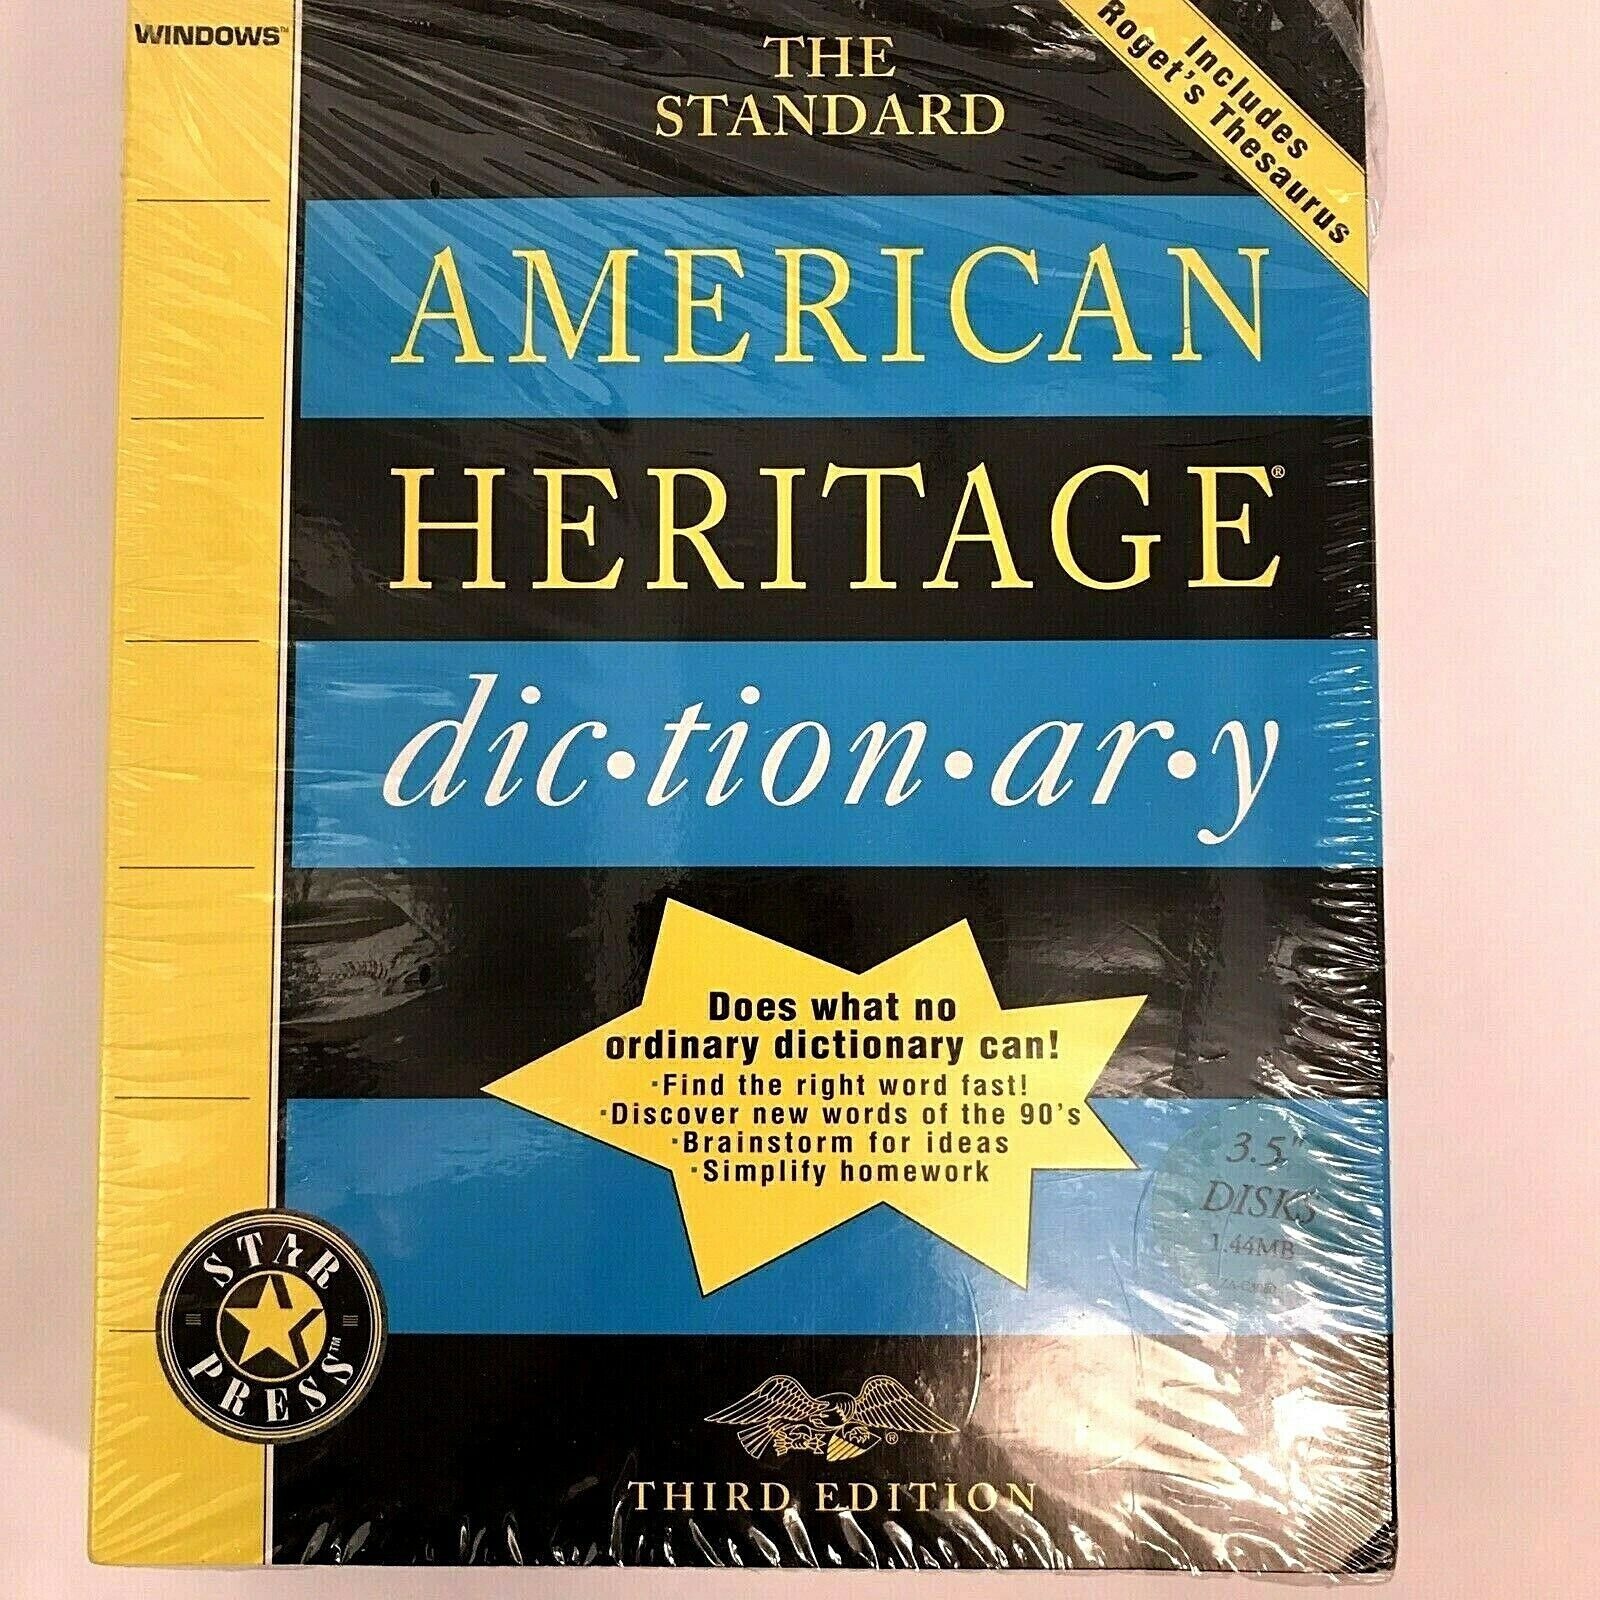 American Heritage Dictionary Roget\'s Thesaurs 3rd Edition Windows 3.5” Disks